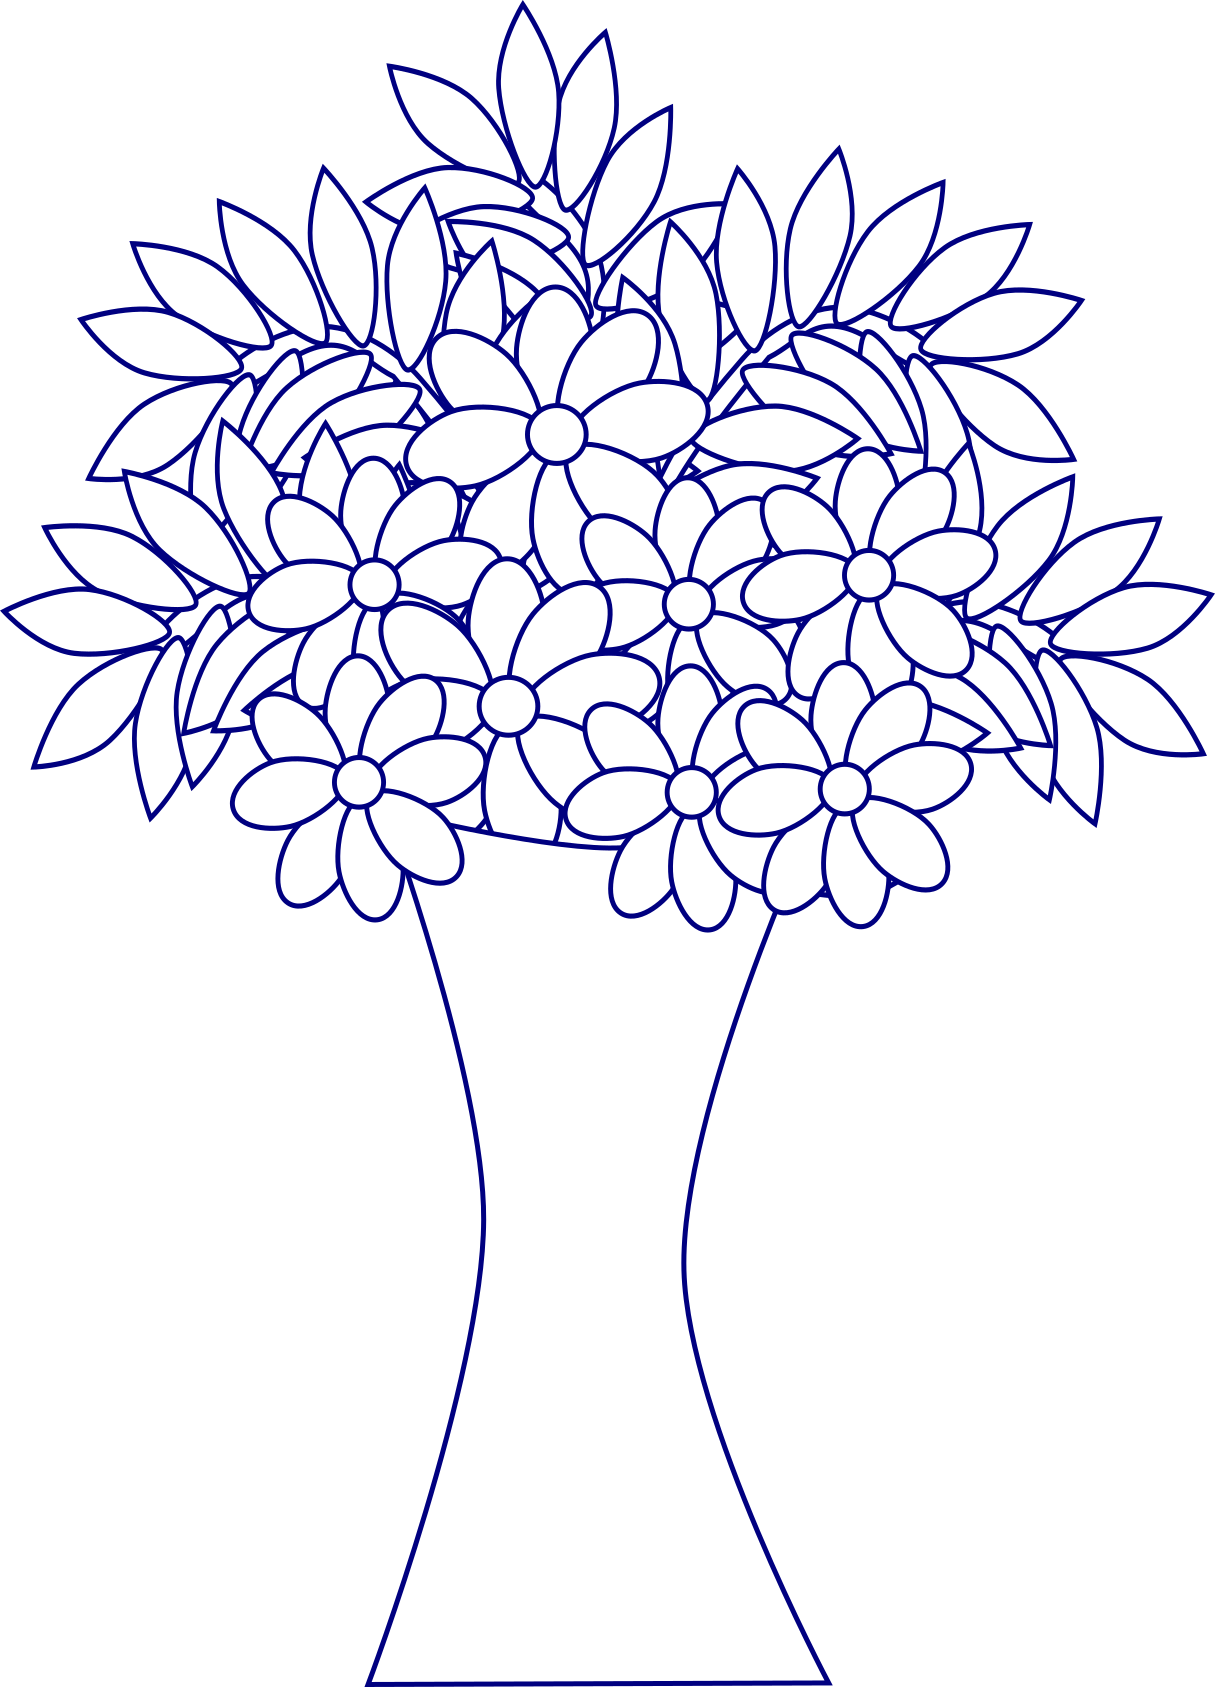 Here is a beautiful. Daisies clipart colouring